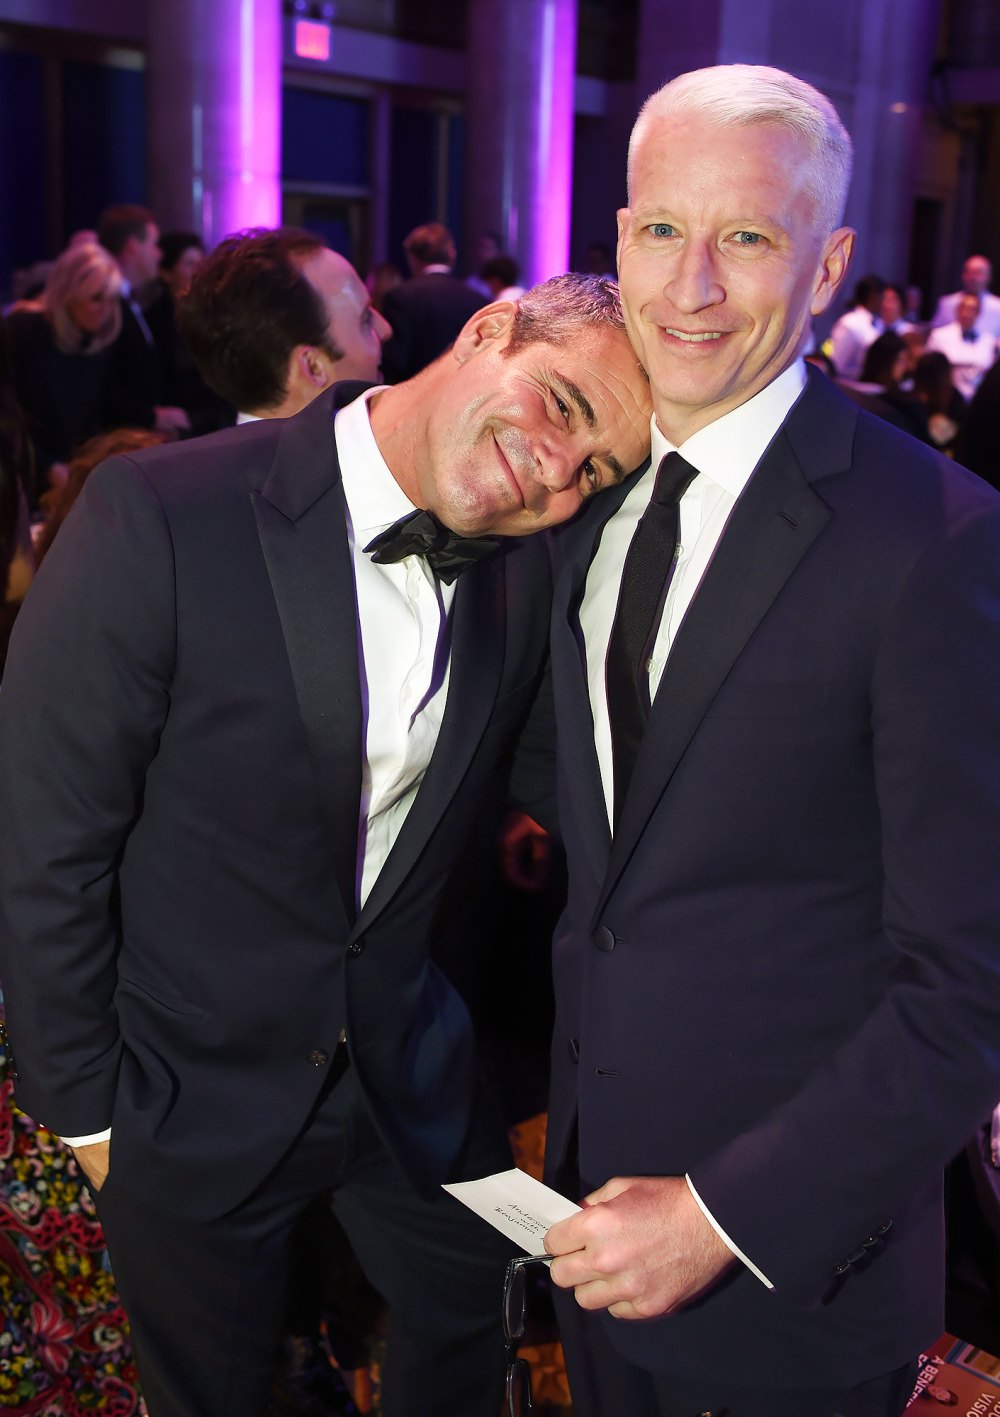 Andy Cohen and Anderson Cooper Drink on CNN New Year’s Eve Special After Past Alcohol Ban